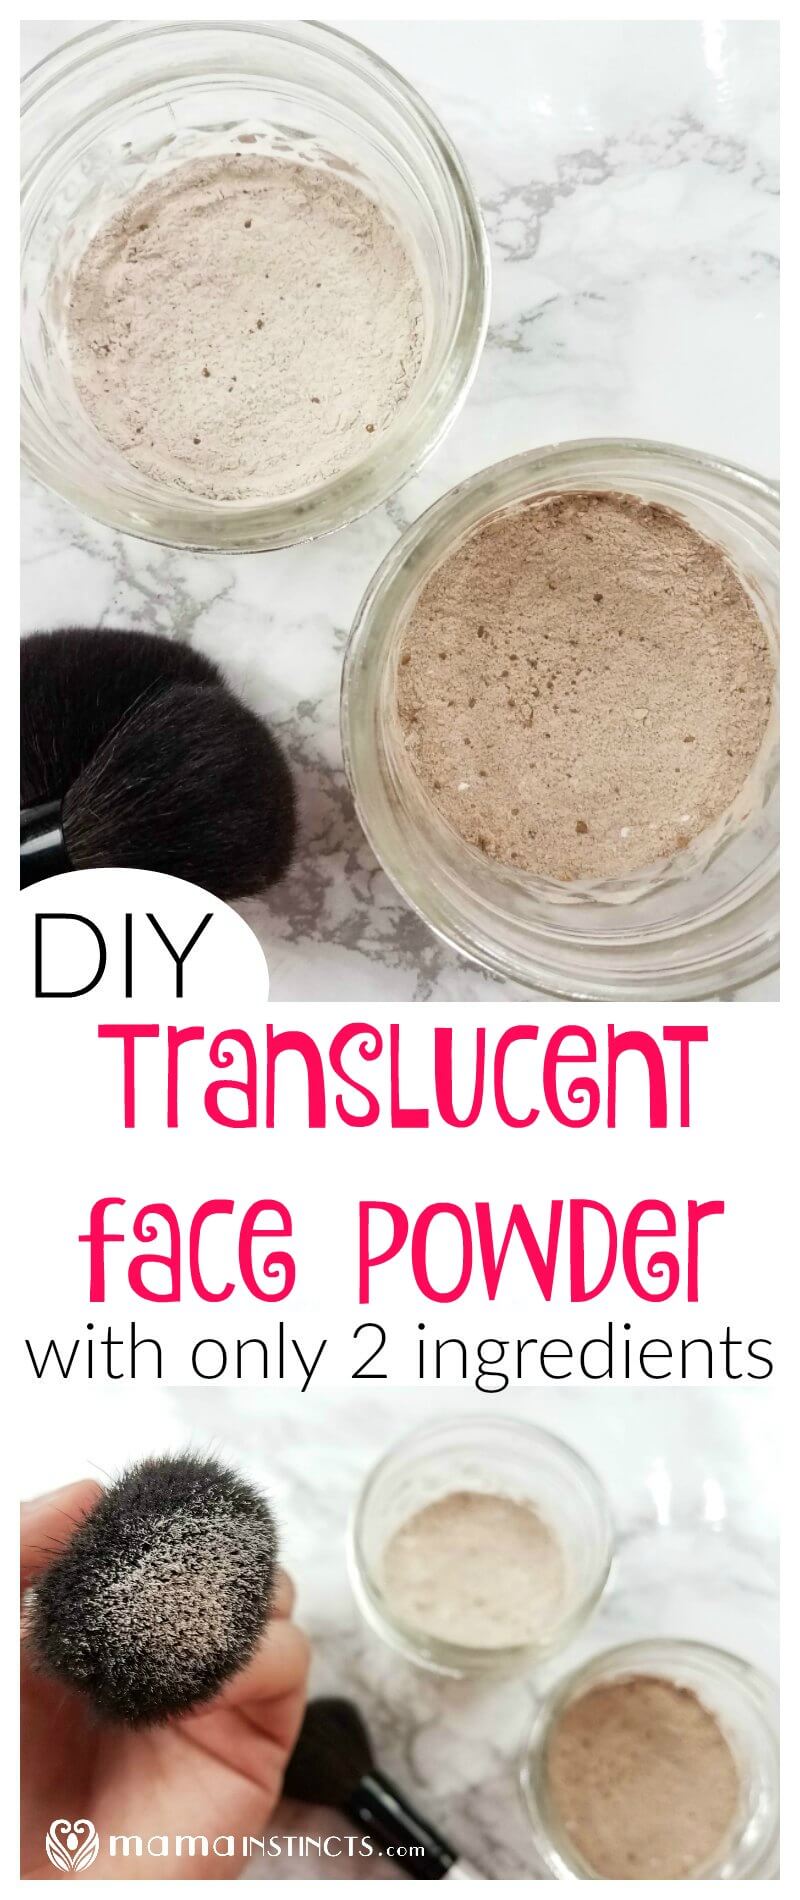 Try this non-toxic and organic DIY translucent face powder to set your make-up and remove the shiny look on you face during the summer months. Safe for moms, dads and even kids.